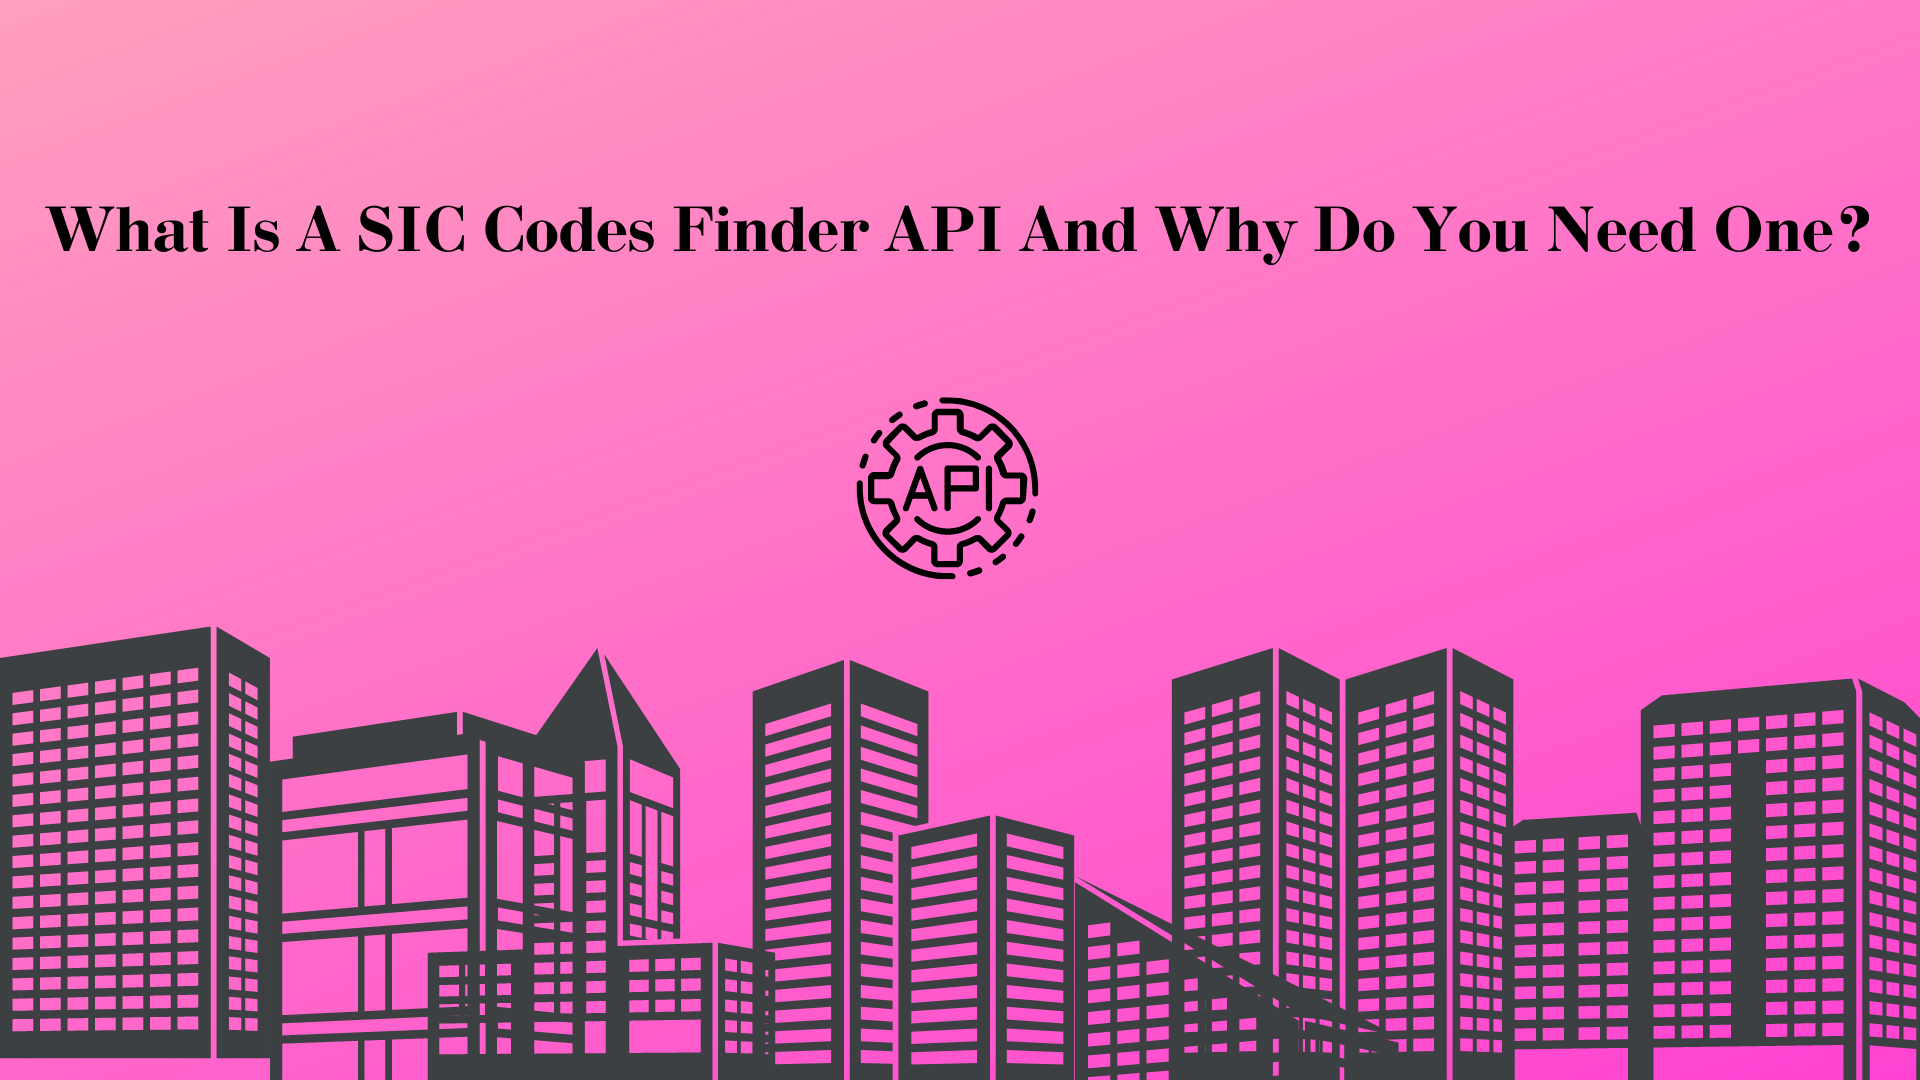 What Is A SIC Codes Finder API And Why Do You Need One?